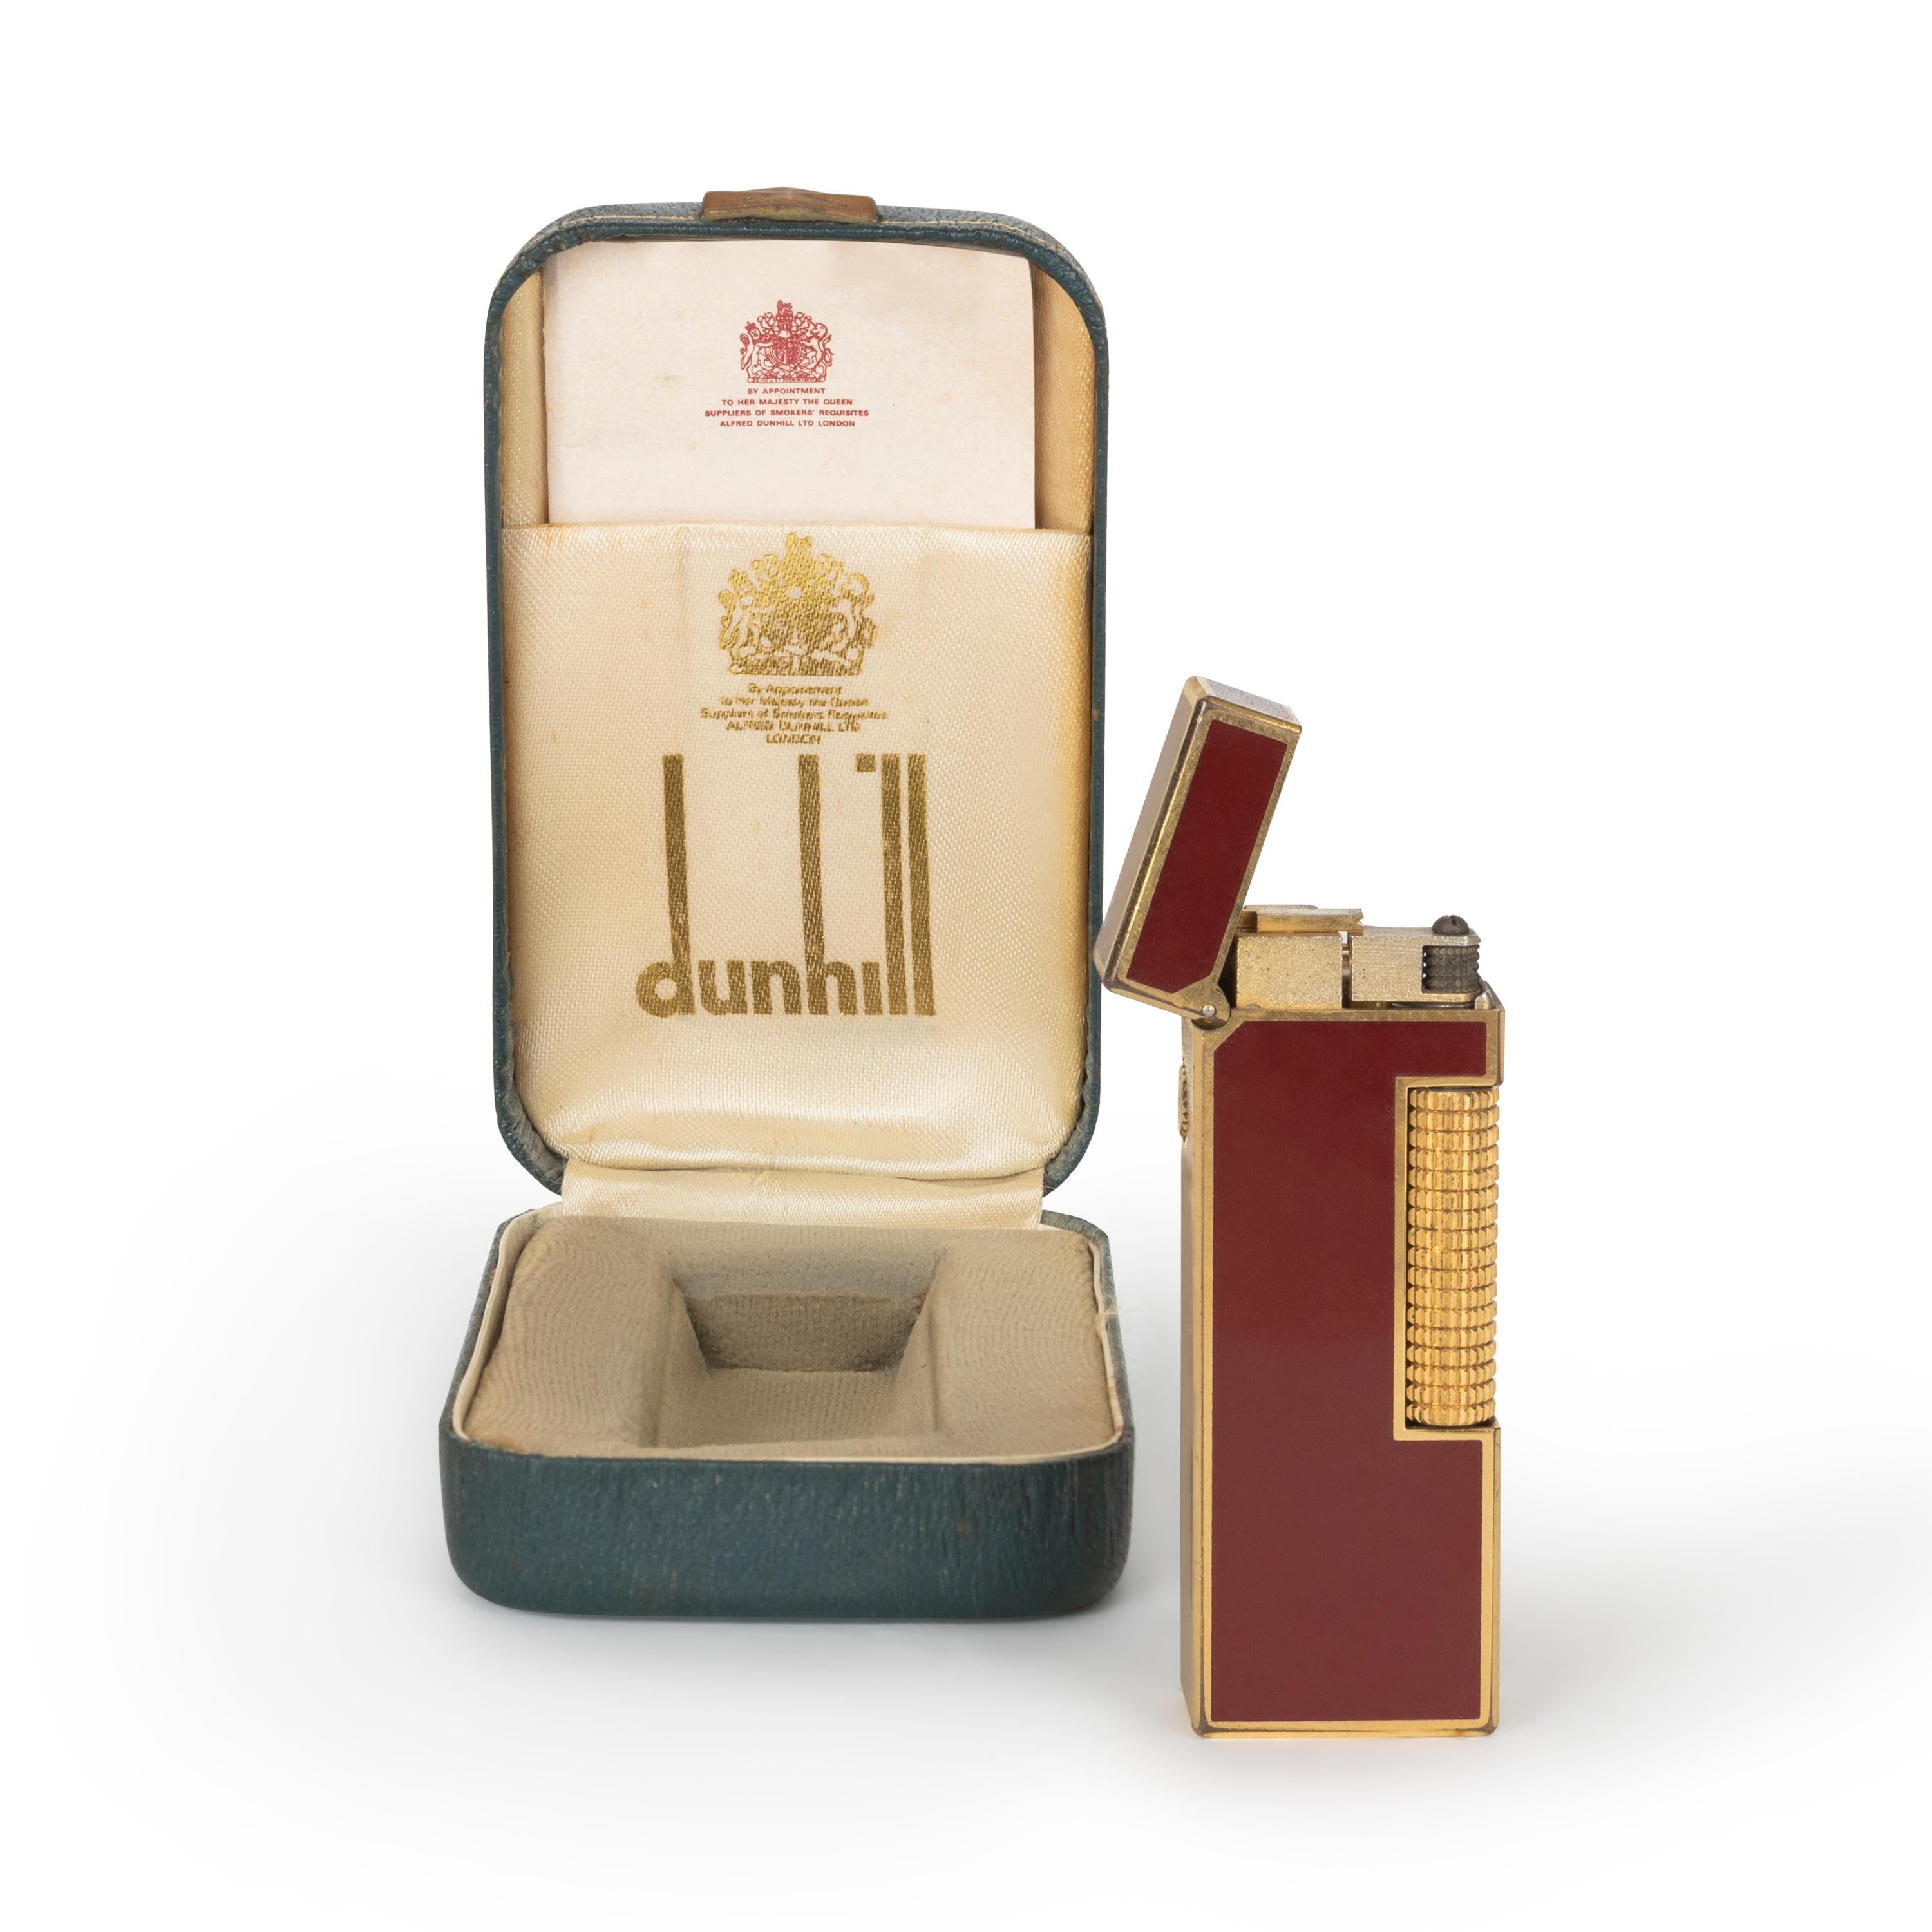 Vintage Dunhill Gold-Plated, Red lacquer Swiss Manufactured, Lighter
In Mint working condition. 
In original box. 
Brand: Dunhill.
Model: Rollagas.
Color: Red Lacquer/Gold.
Measures: 63cm x 23cm x 12cm.
Weight: 71g.
Made in Switzerland.